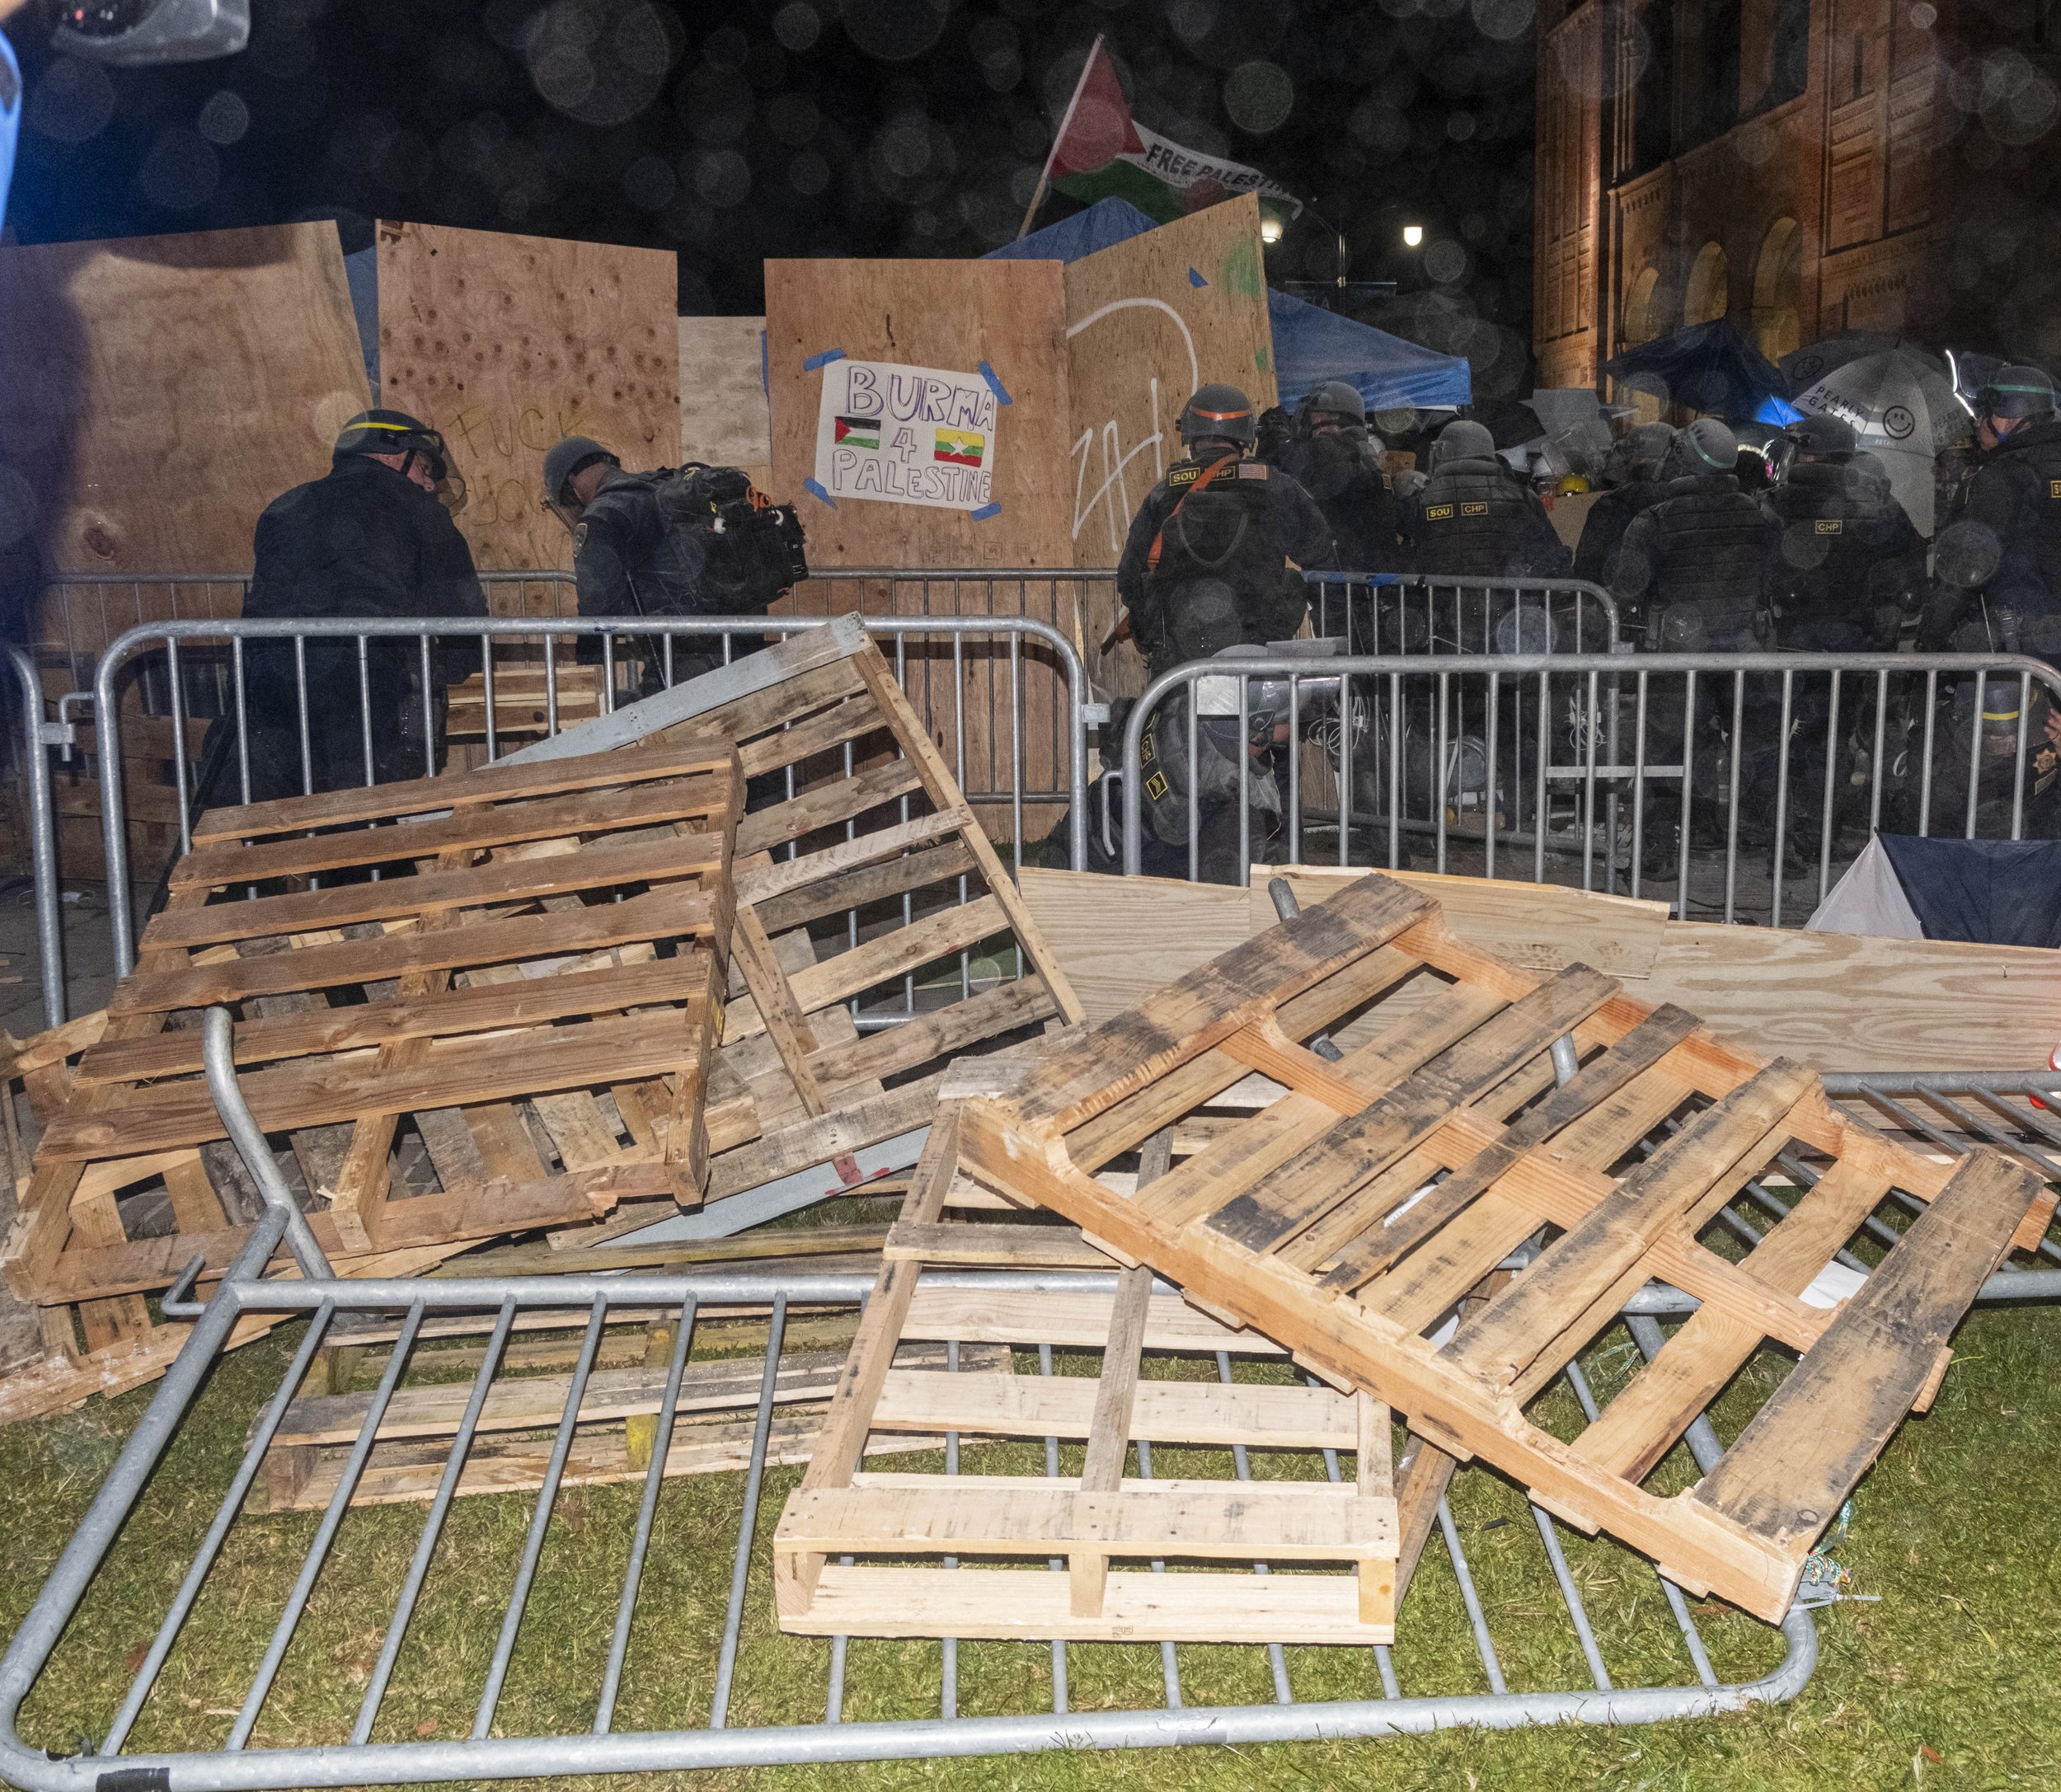  Pallets thrown on the floor that were being used as barriers for the University of California, Los Angeles encampment on Wednesday, May 1 at Los Angeles, Calif. (Danilo Perez | The Corsair) 